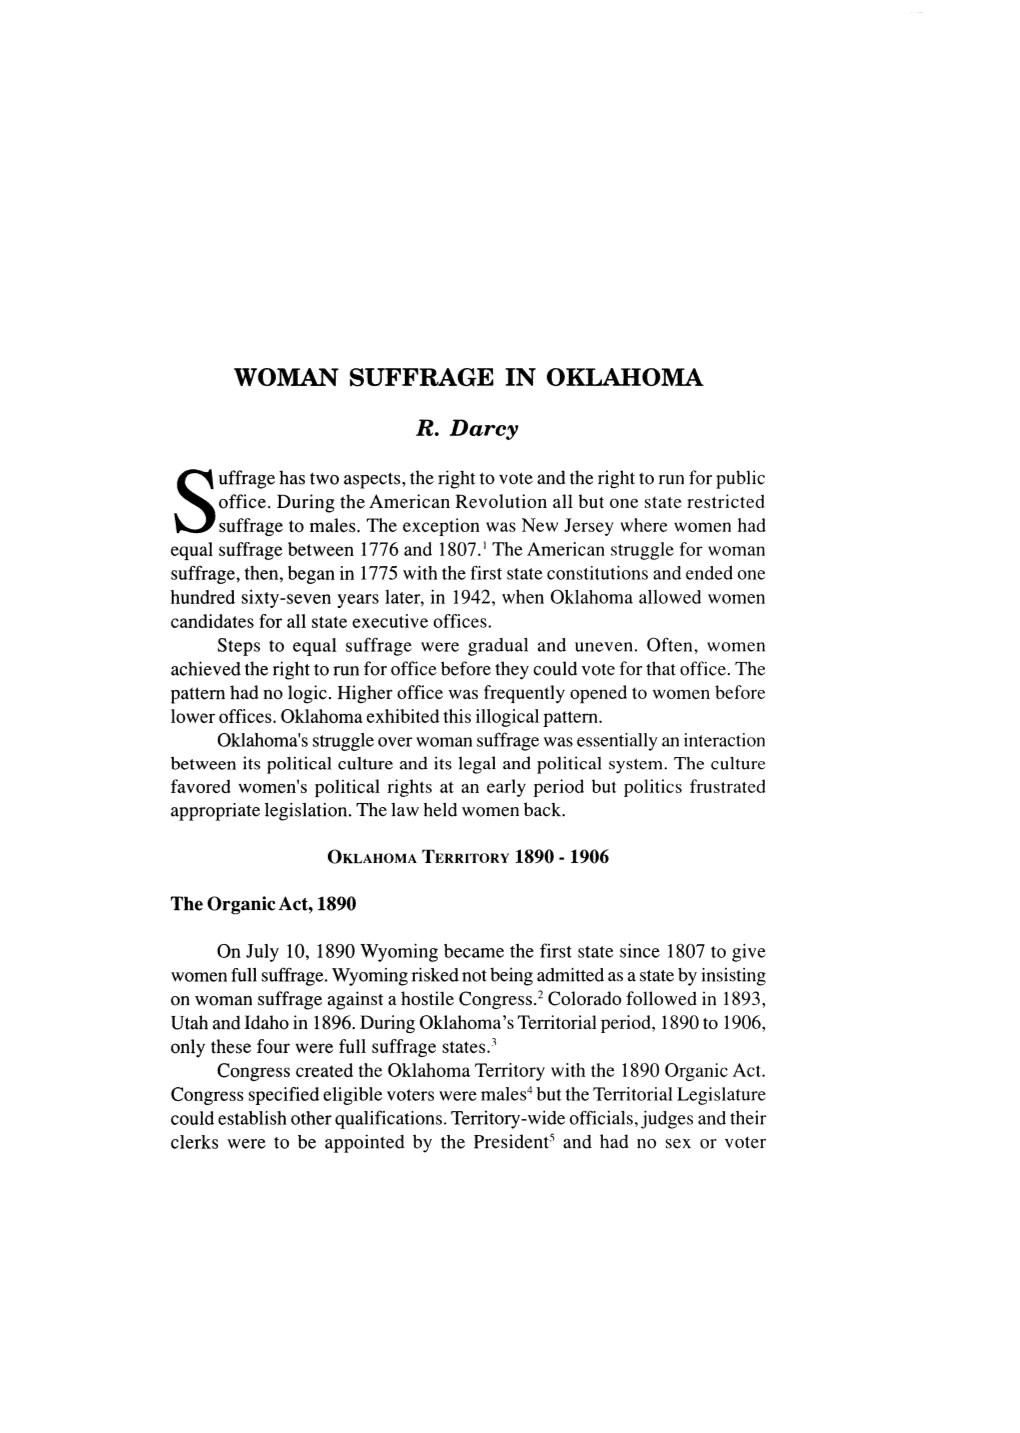 Woman Suffrage in Oklahoma